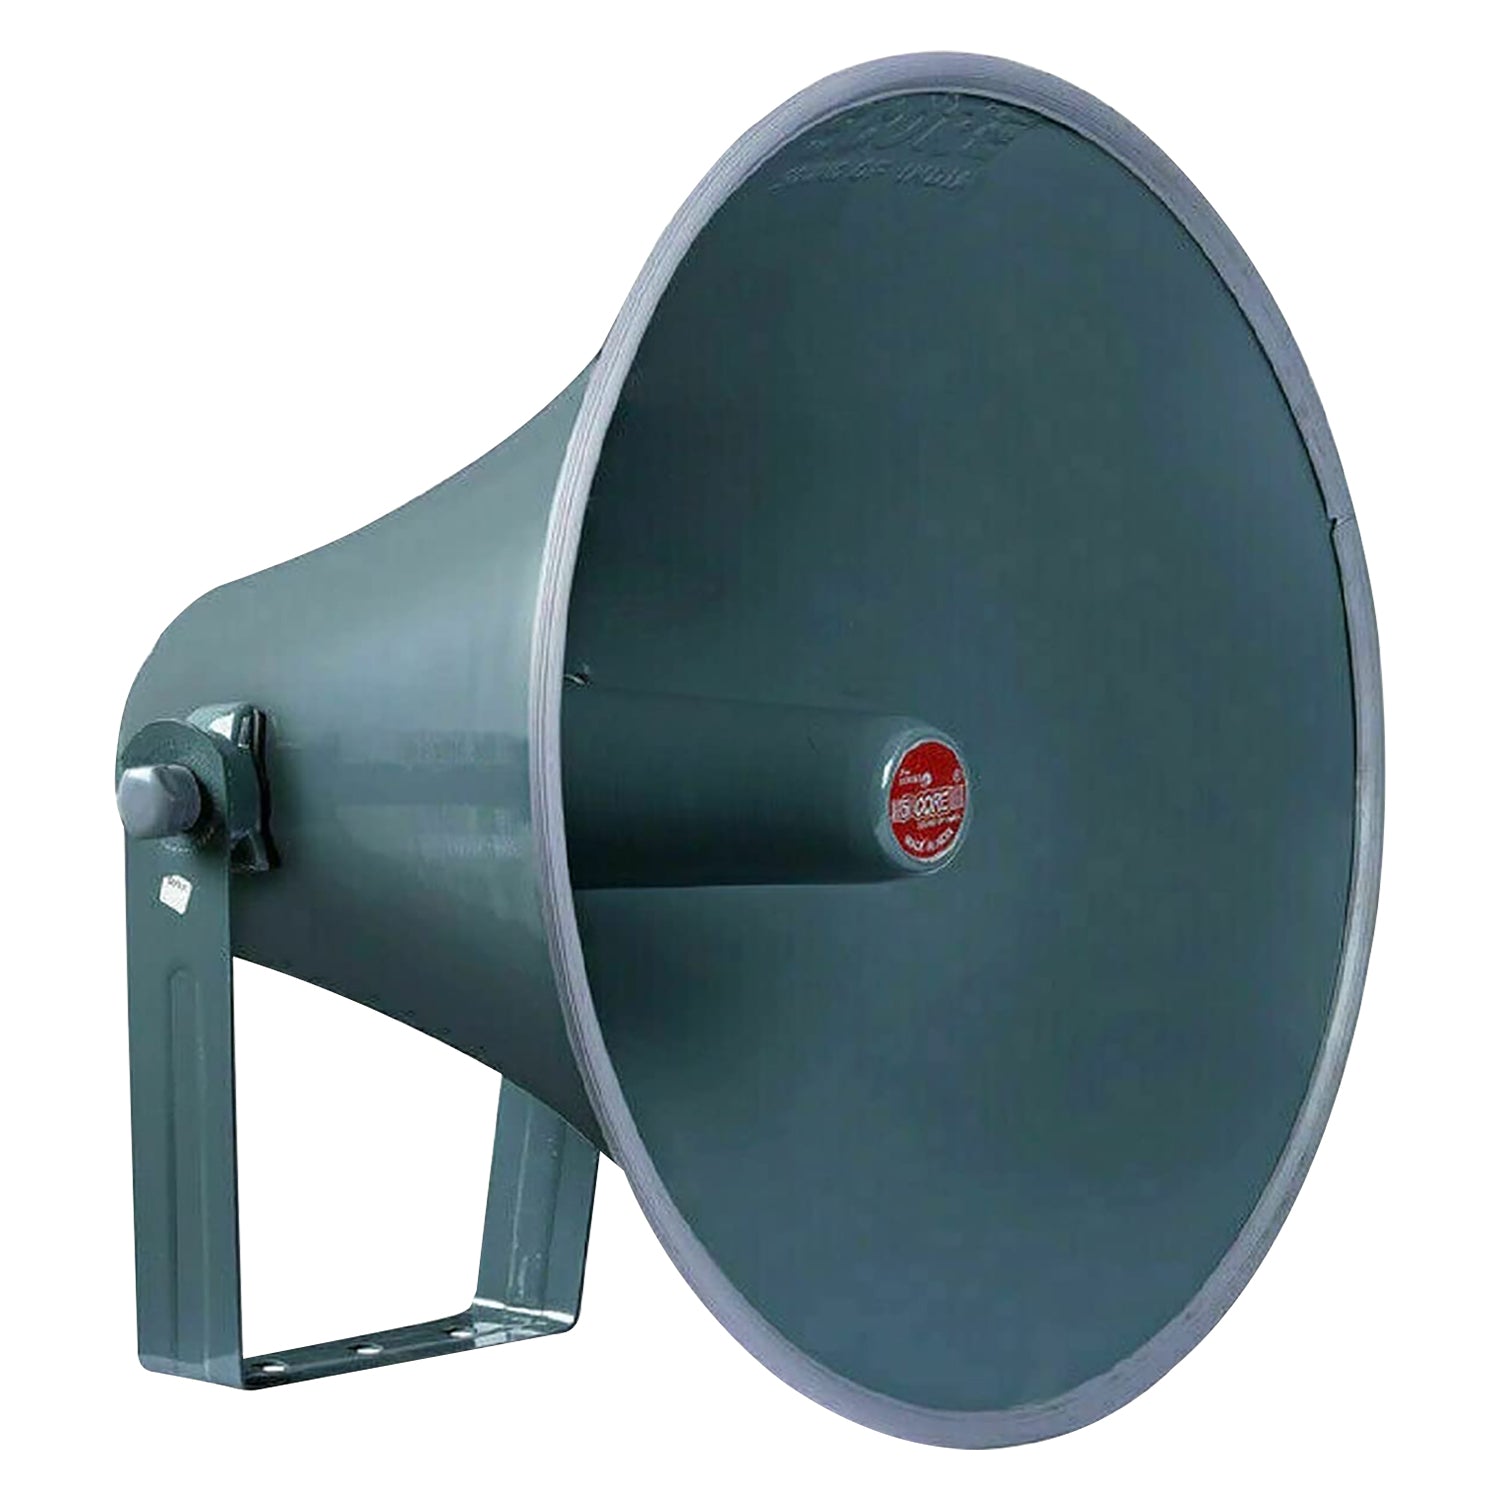 5 Core PA Speaker Horn Throat  16 inch All Weather Use  Support Wide Range of Compression Drivers